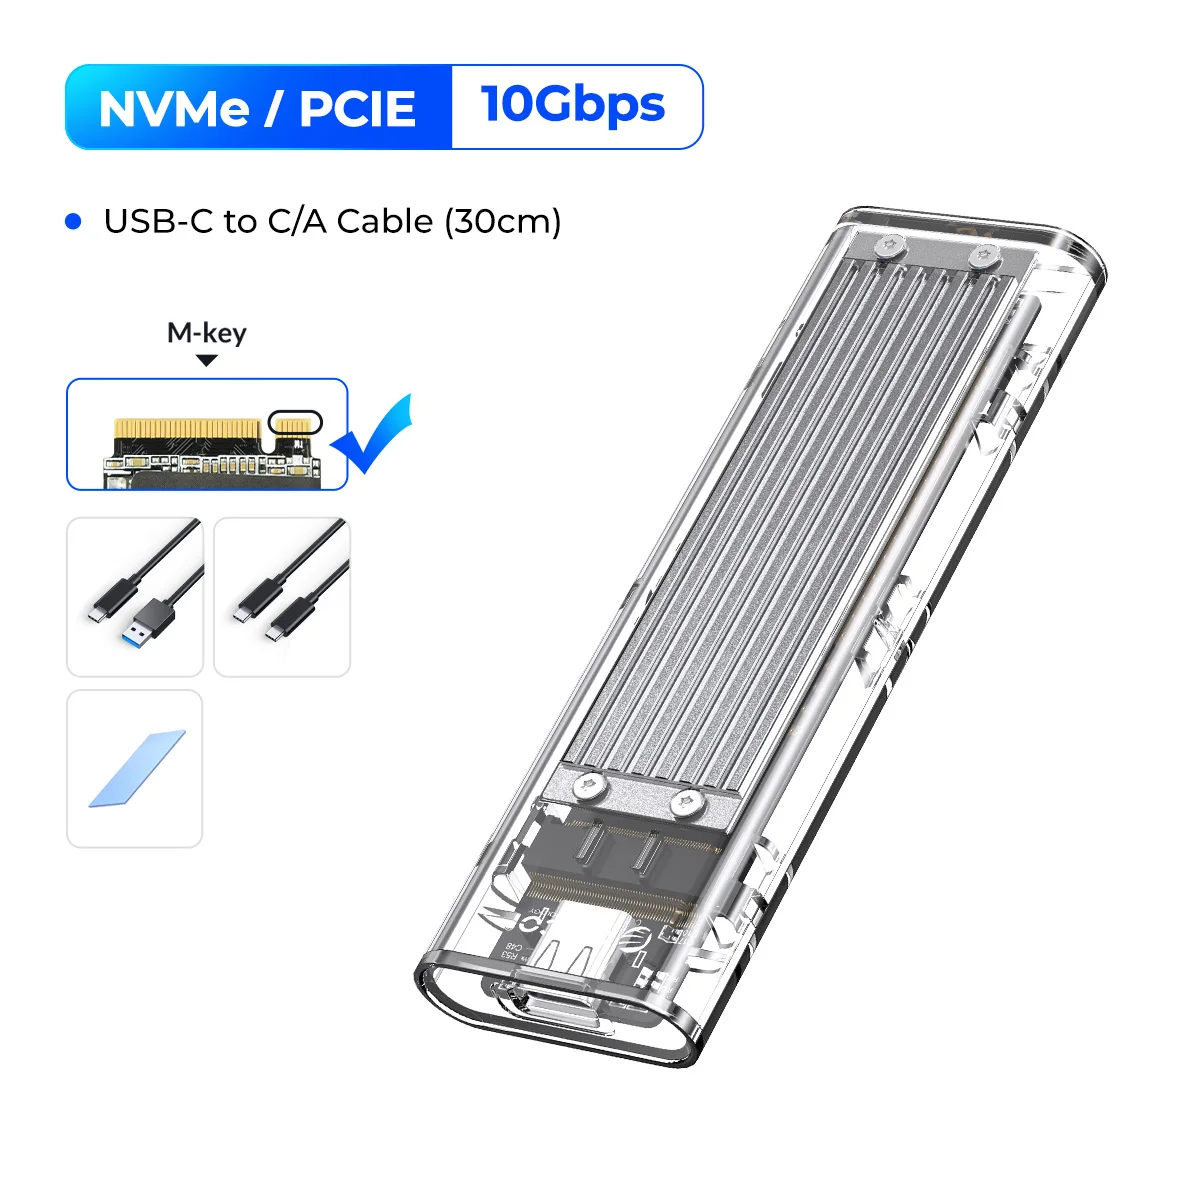 NVME - 10Gbps Silver